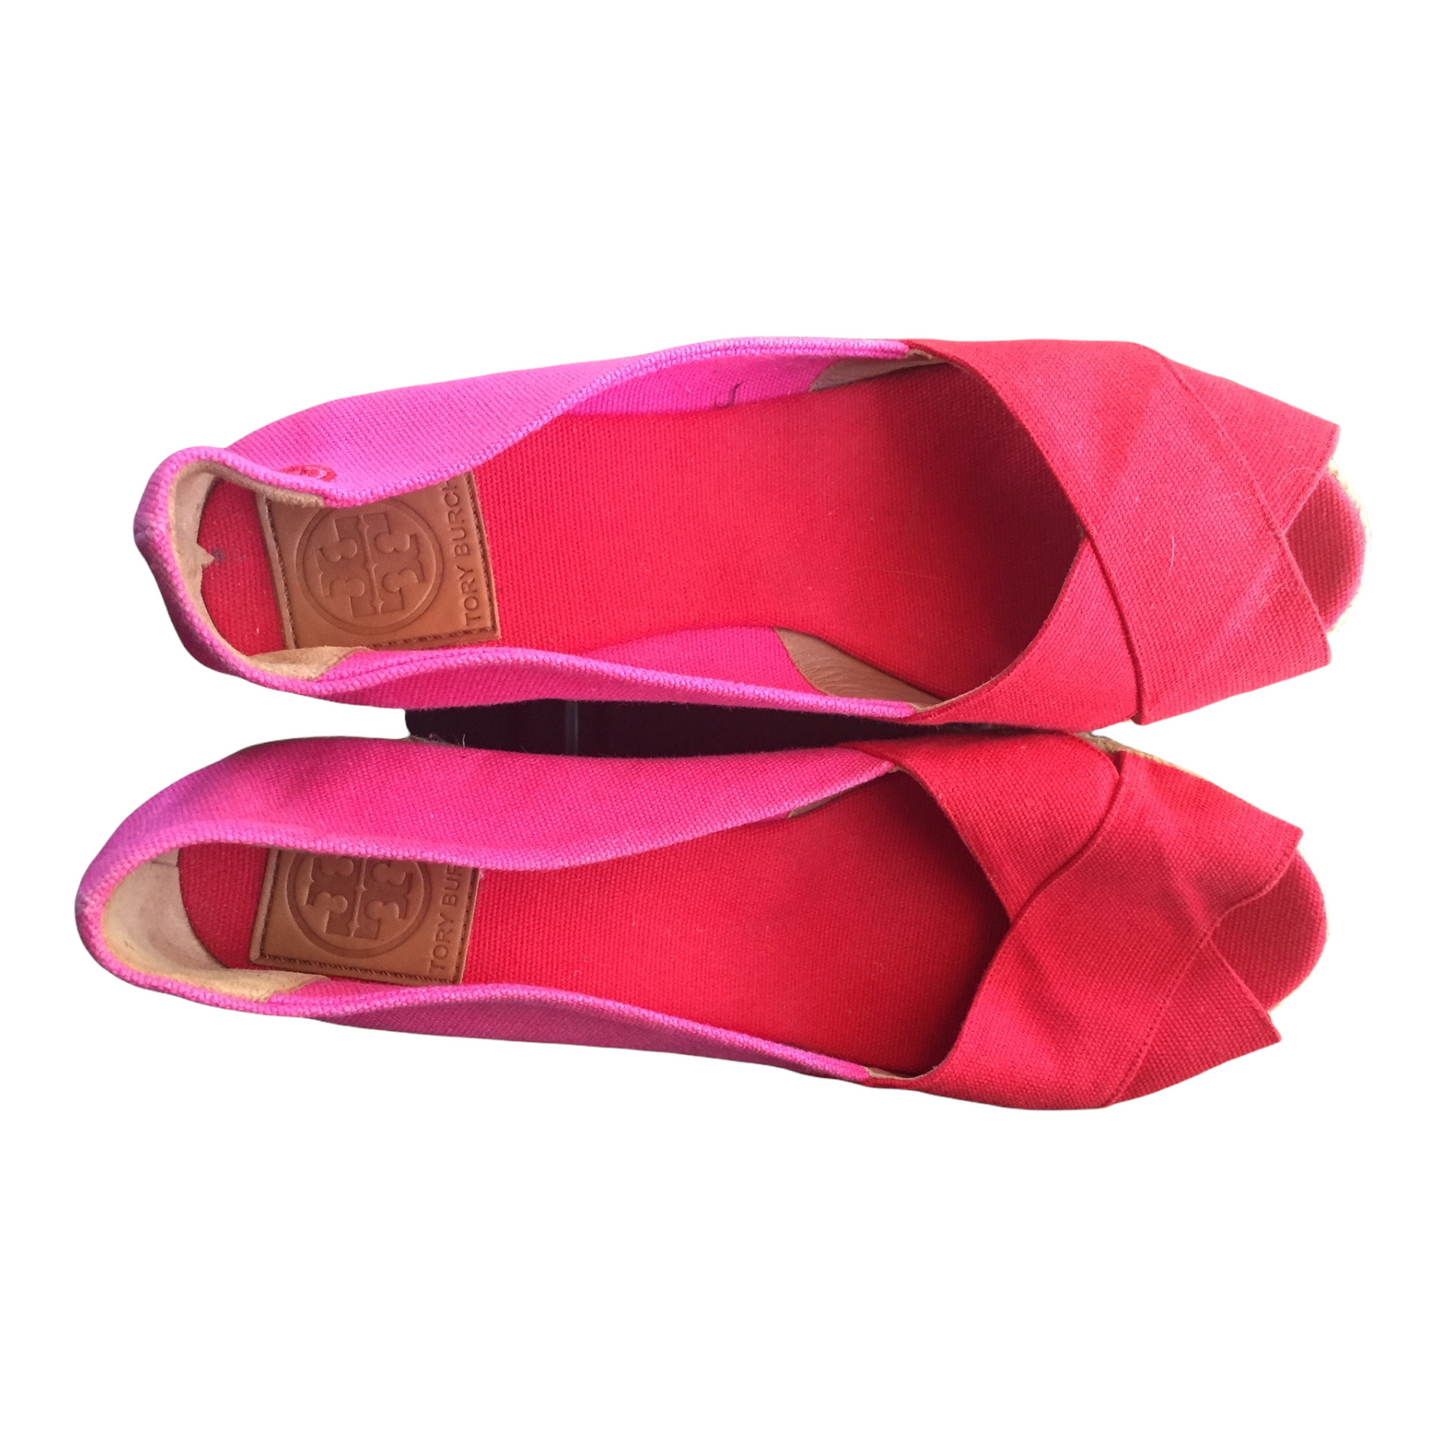 Tory Burch Red/Pink Canvas Espadrilles Wedges Sandals